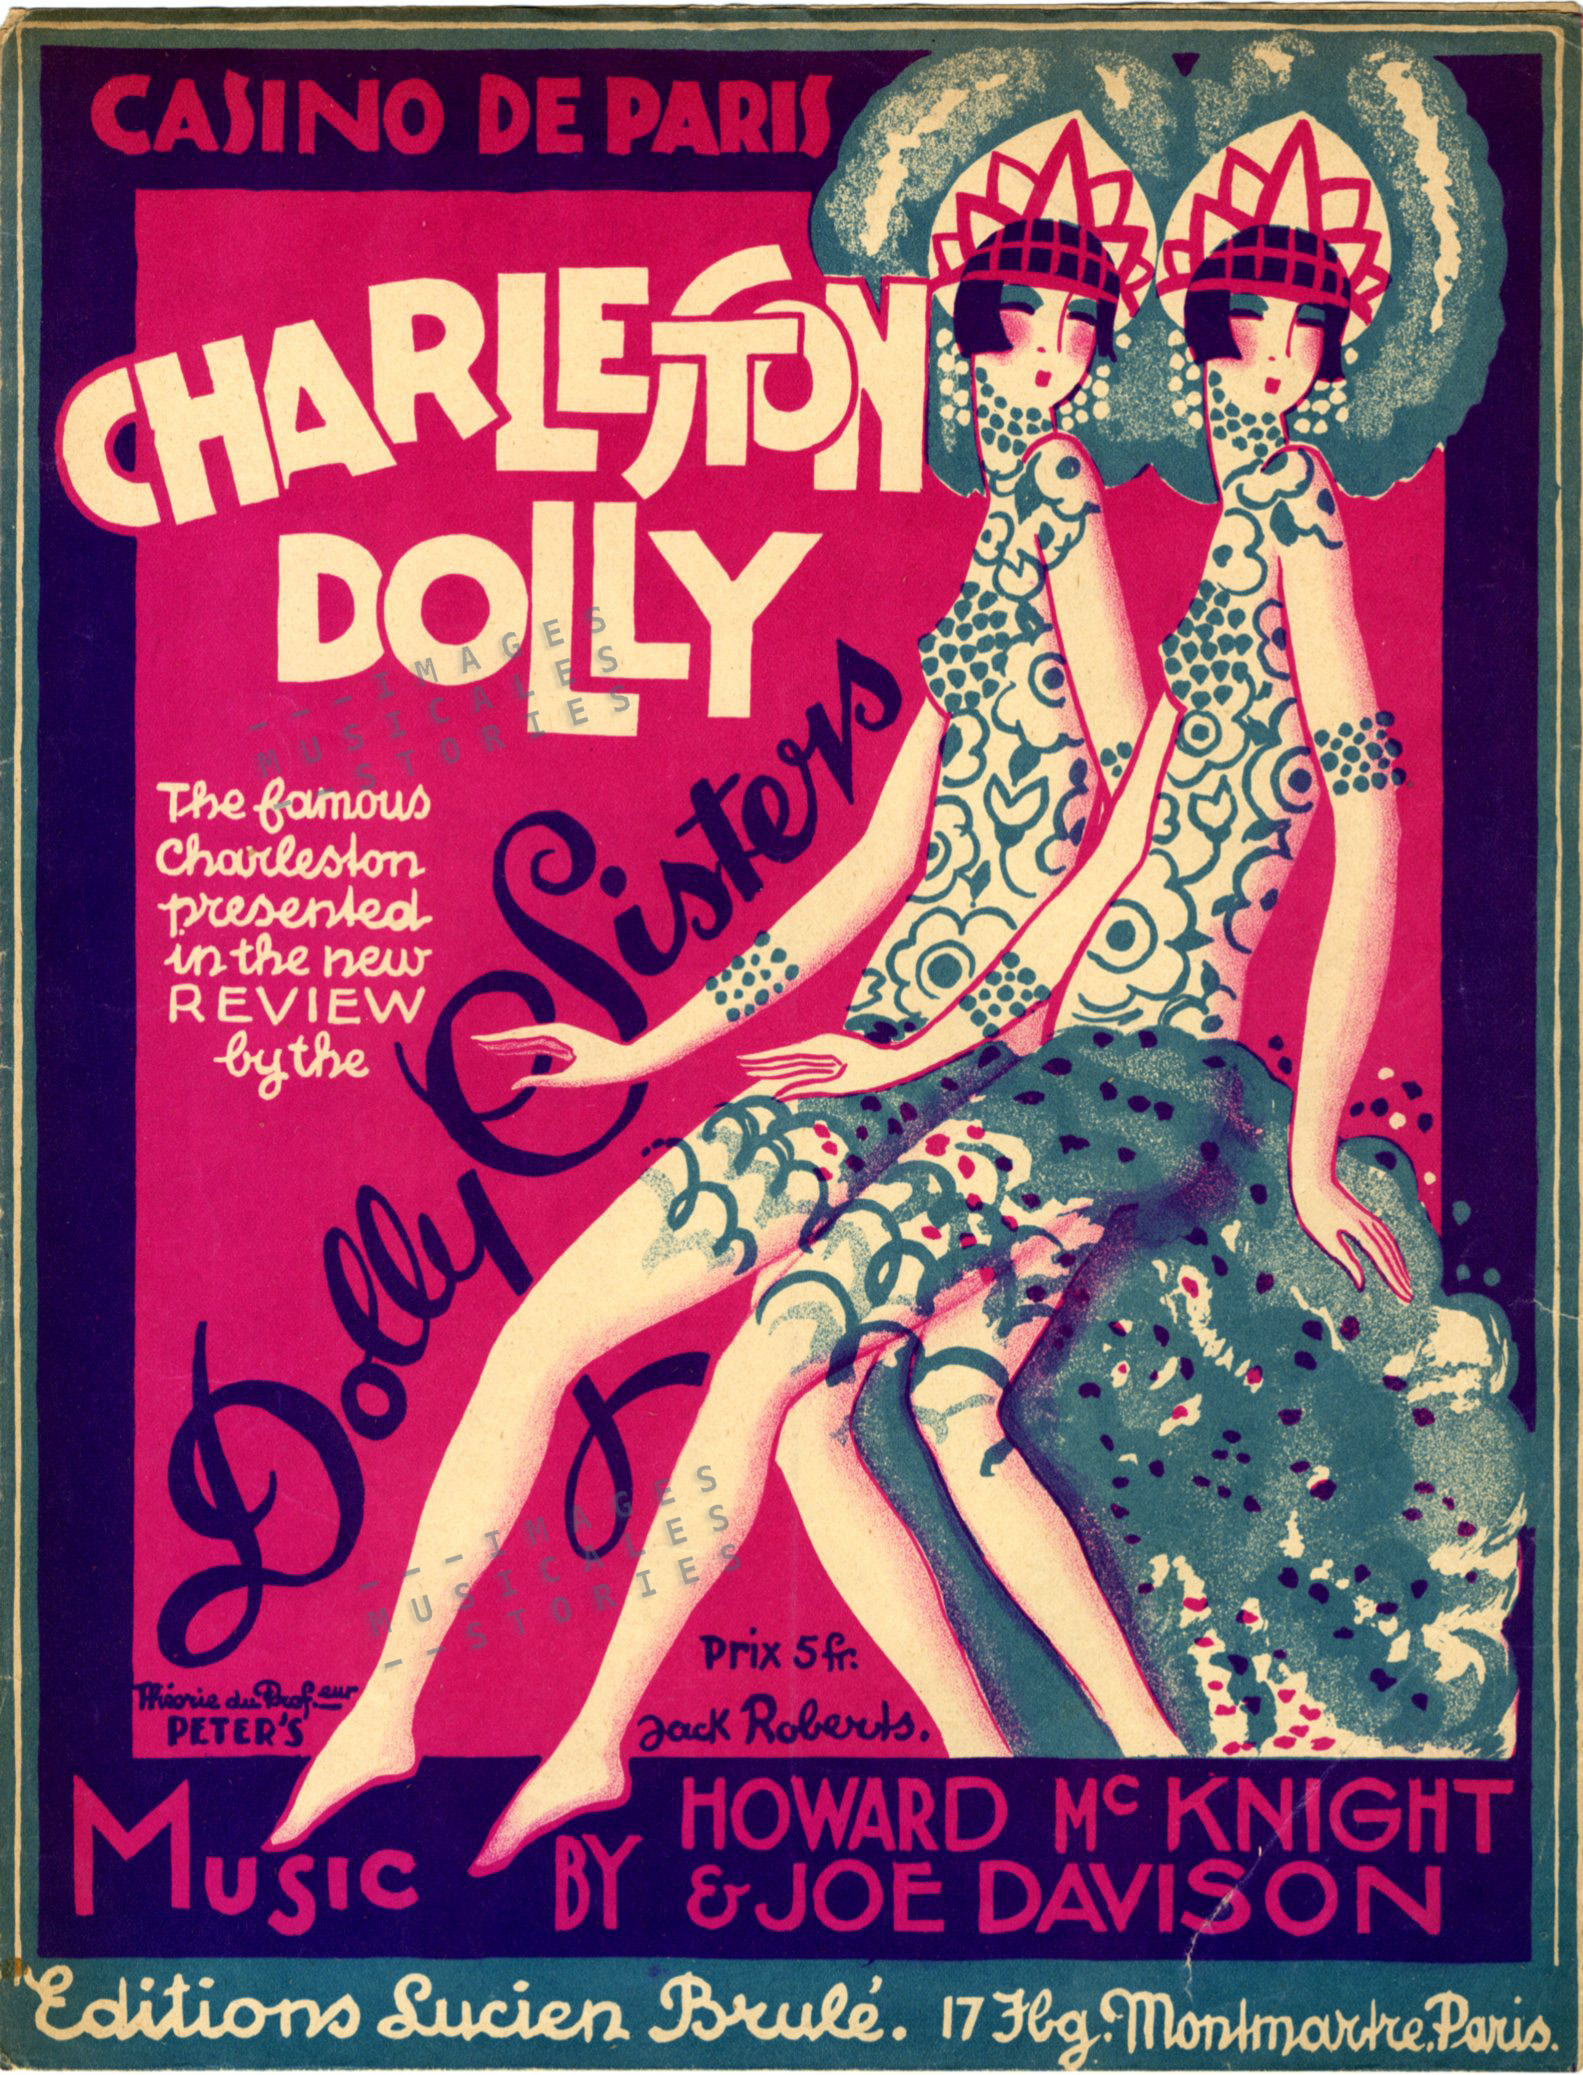 Charleston Dolly, illustrated by Jack Roberts